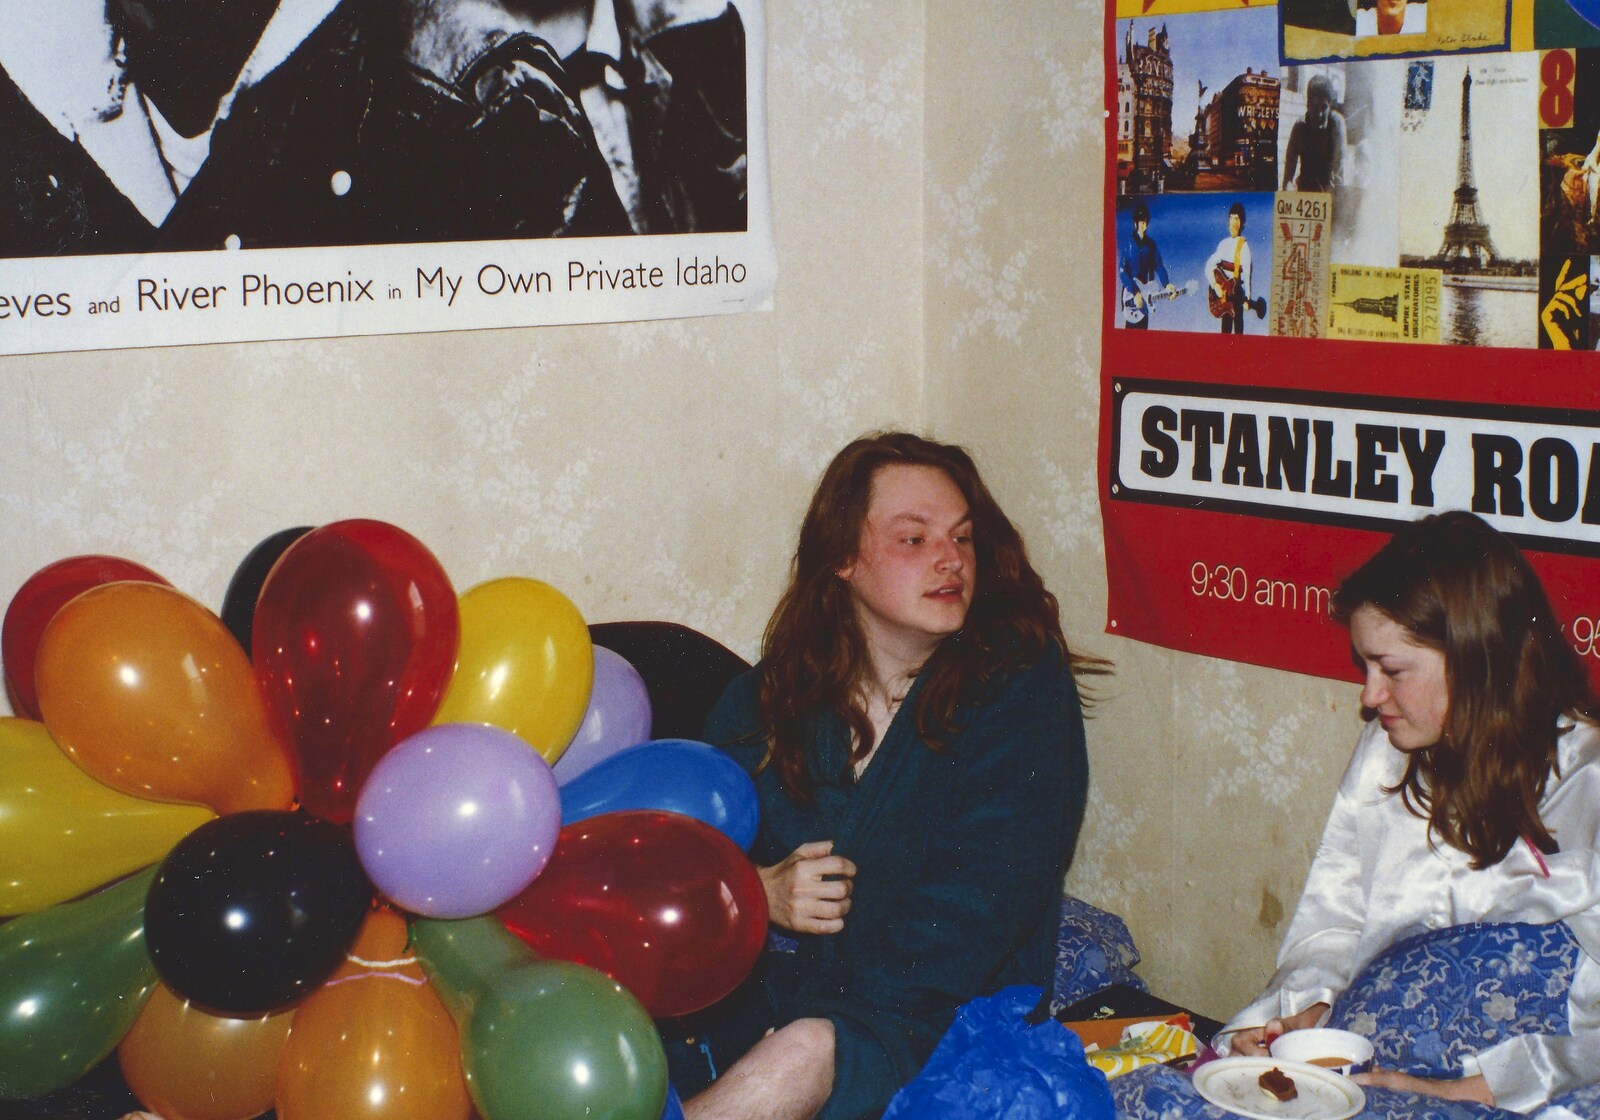 Sis Graduates from De Montfort, Leicester, Leicestershire - 9th August 1997: Hanging out with balloons